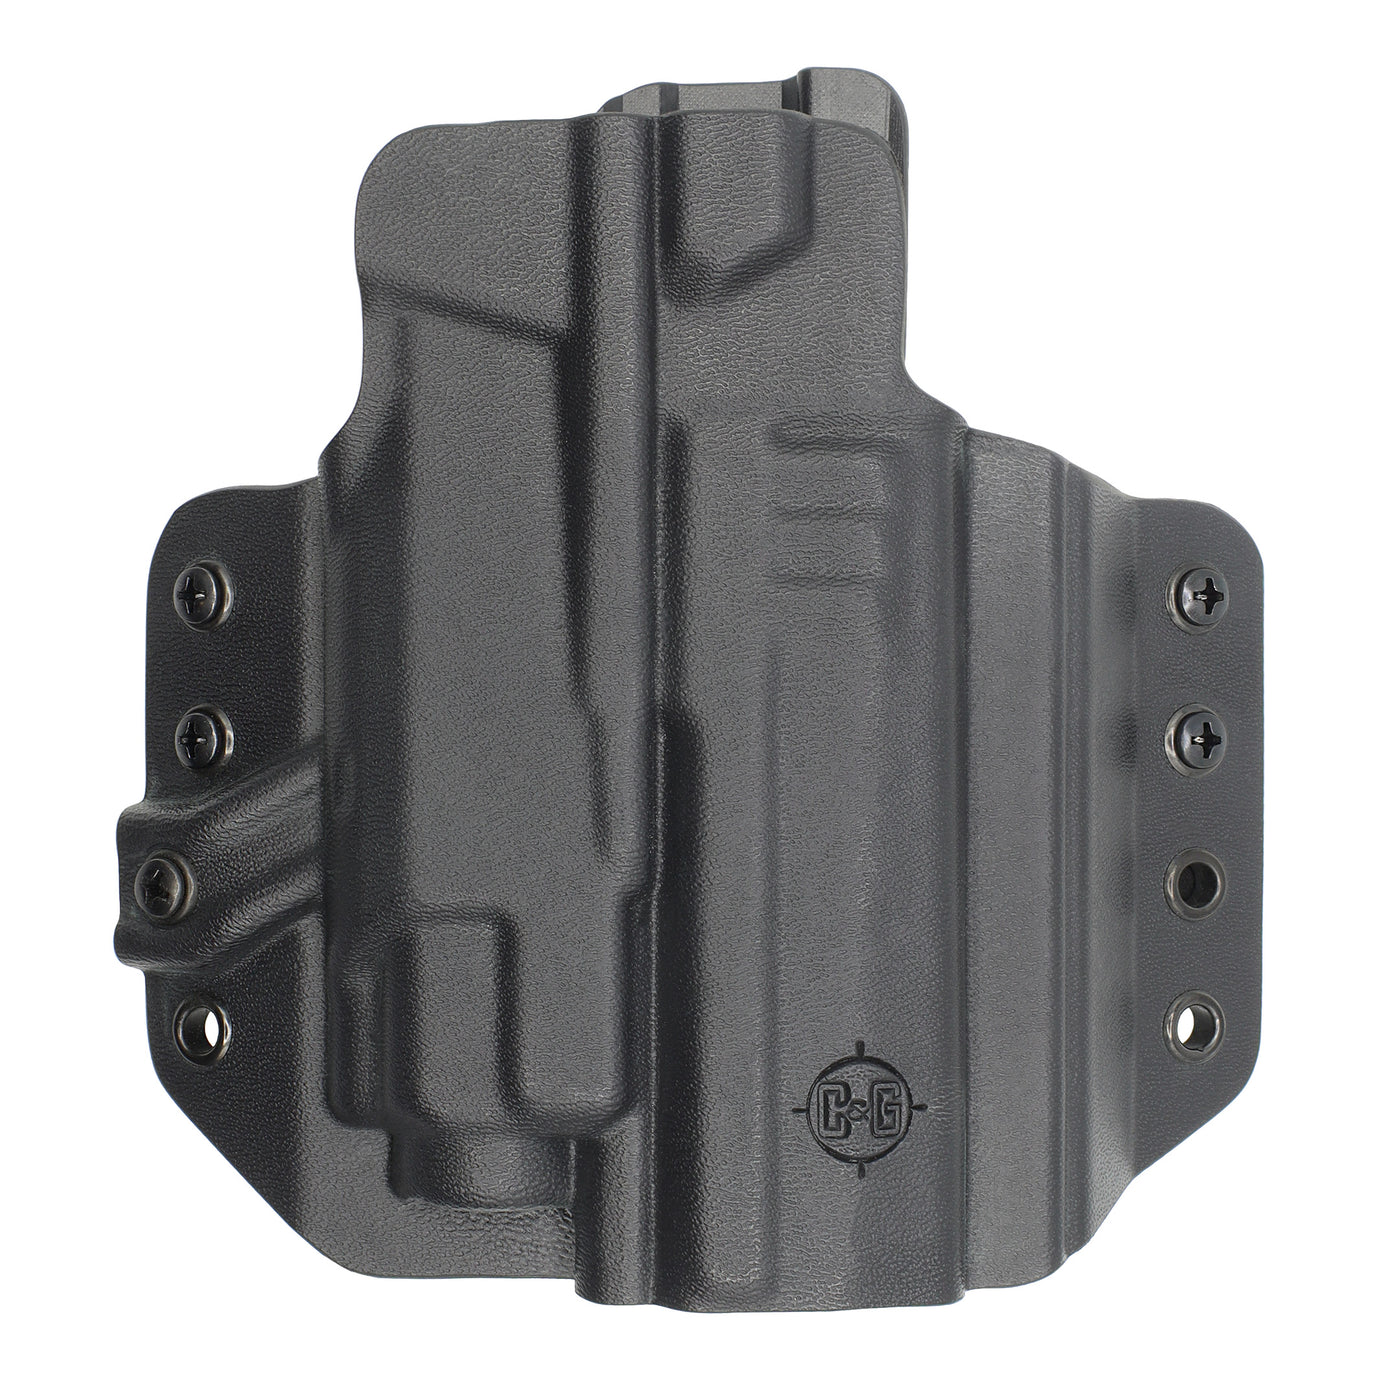 C&G Holsters quickship OWB tactical Springfield XDM streamlight TLR8